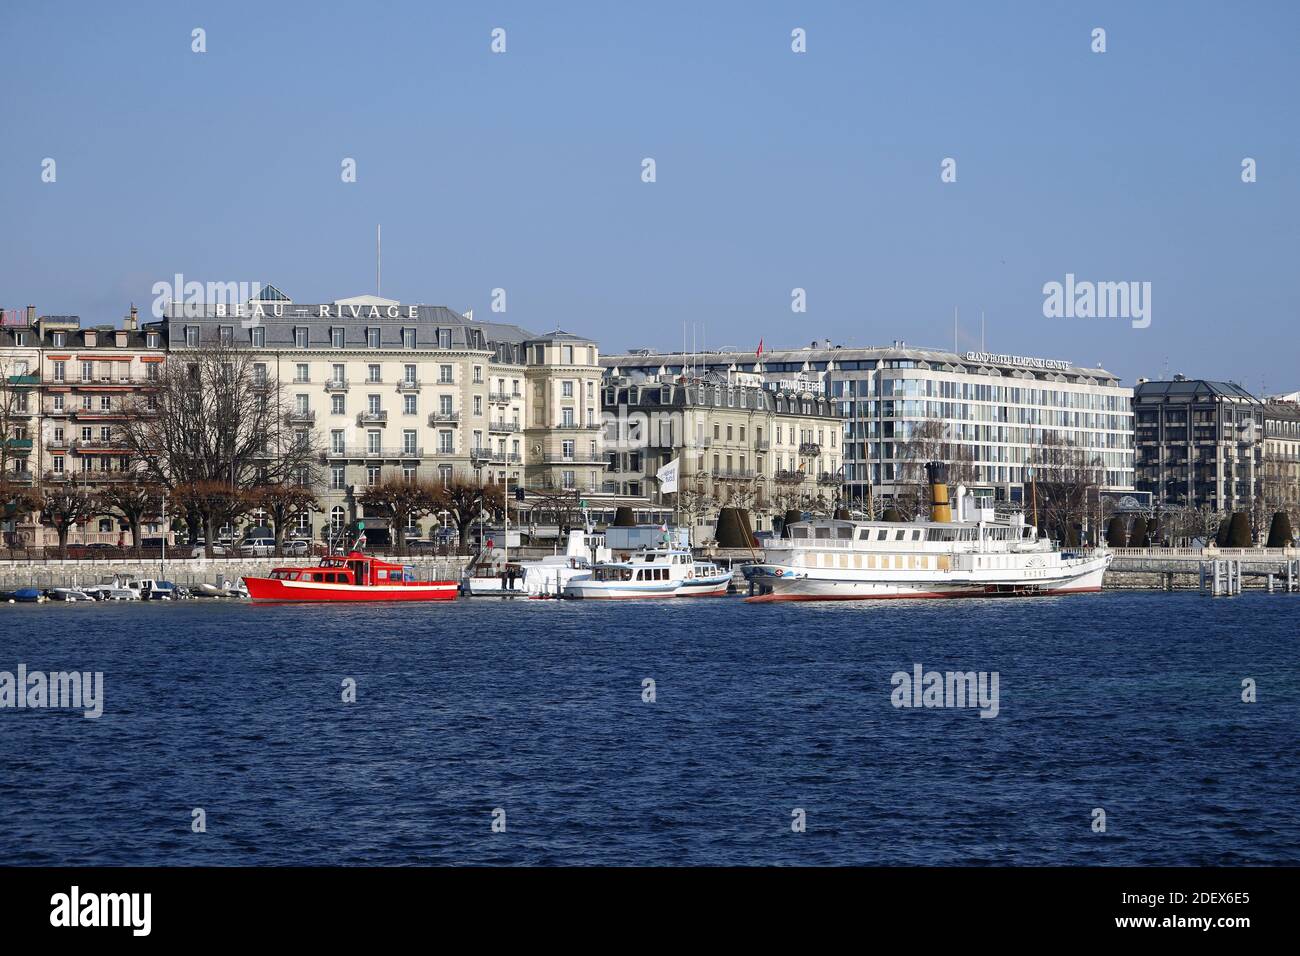 GENEVA, SWITZERLAND - Feb 20, 2018: City trip in Geneva during winter. Picture shows boats on the lake and buildings in the background. Stock Photo